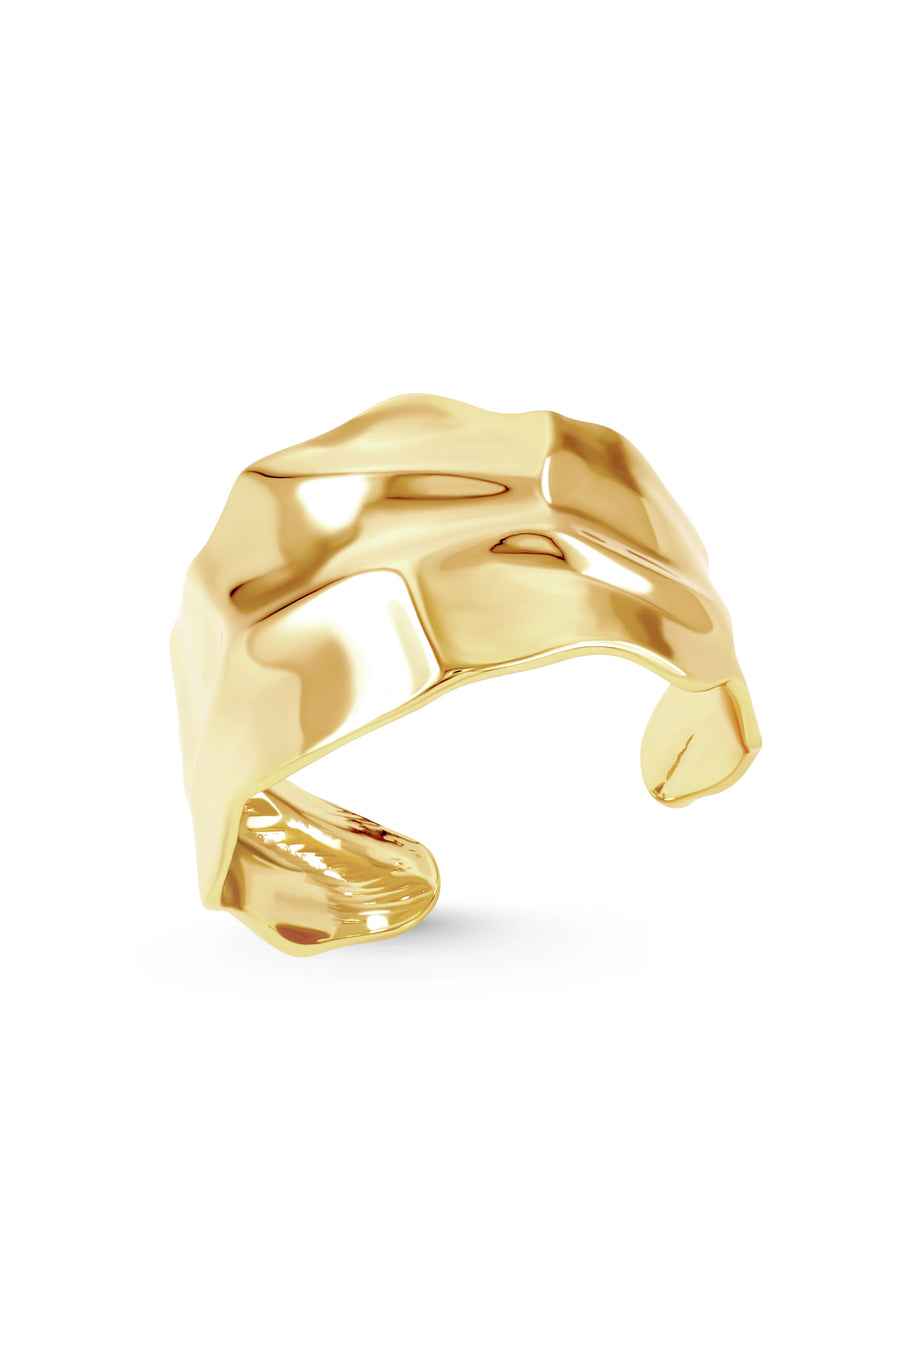 ORPHIC Cuff. Broad crumpled plate in high gloss finish cuff bracelet, 18K gold vermeil, handmade, hypoallergenic, water-resistant